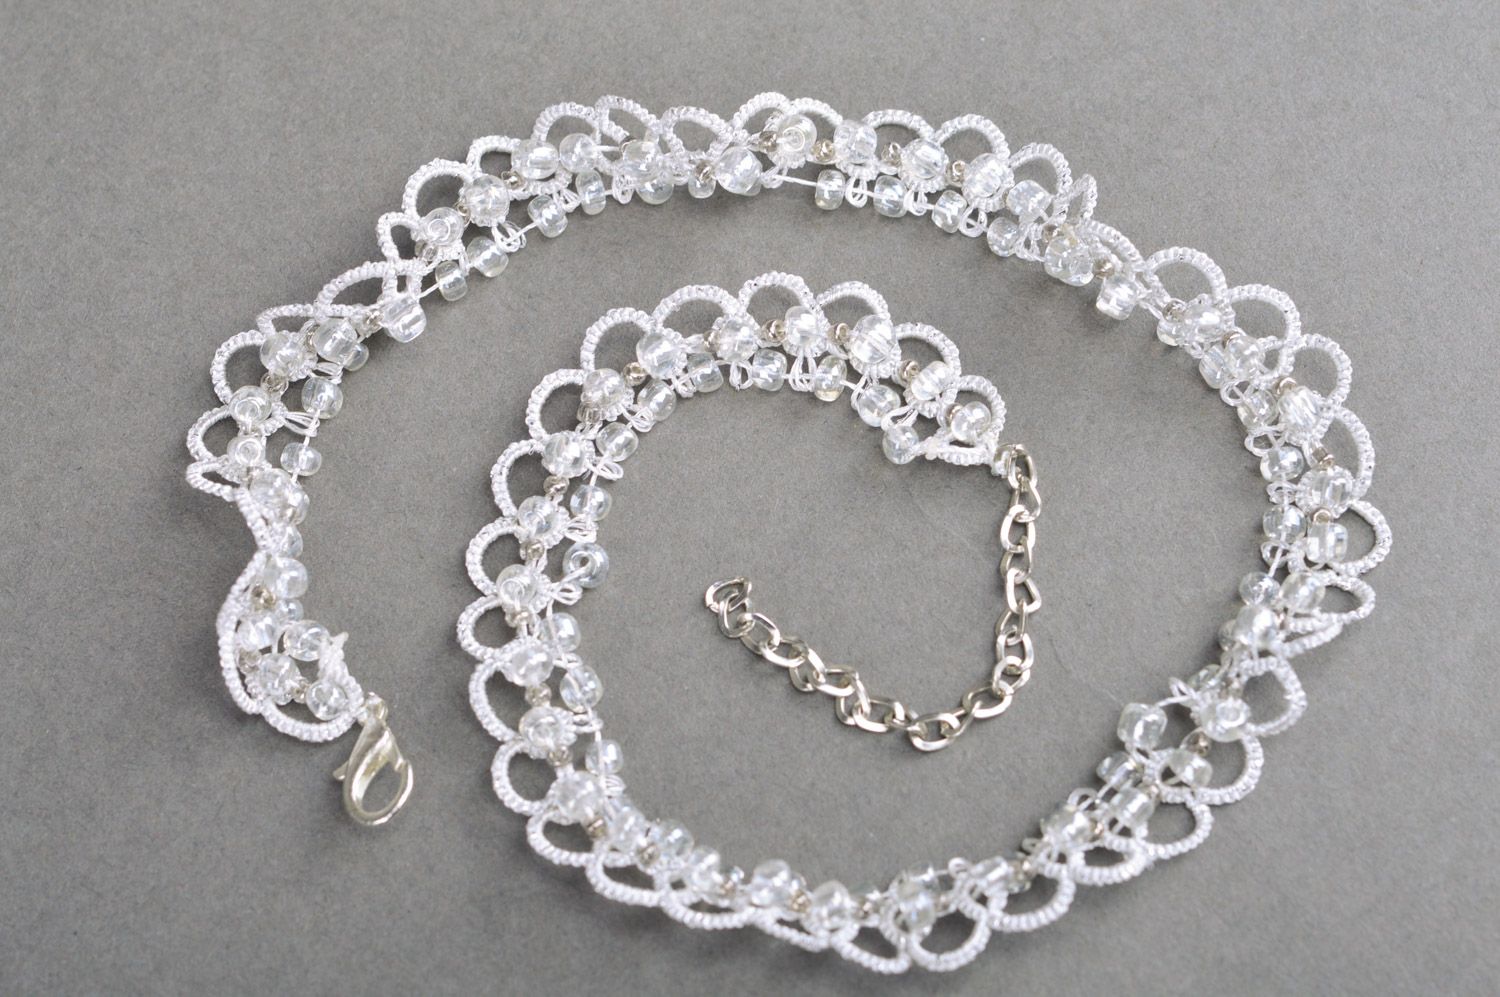 Handmade tender white tatted necklace woven of Czech beads and satin thread photo 4